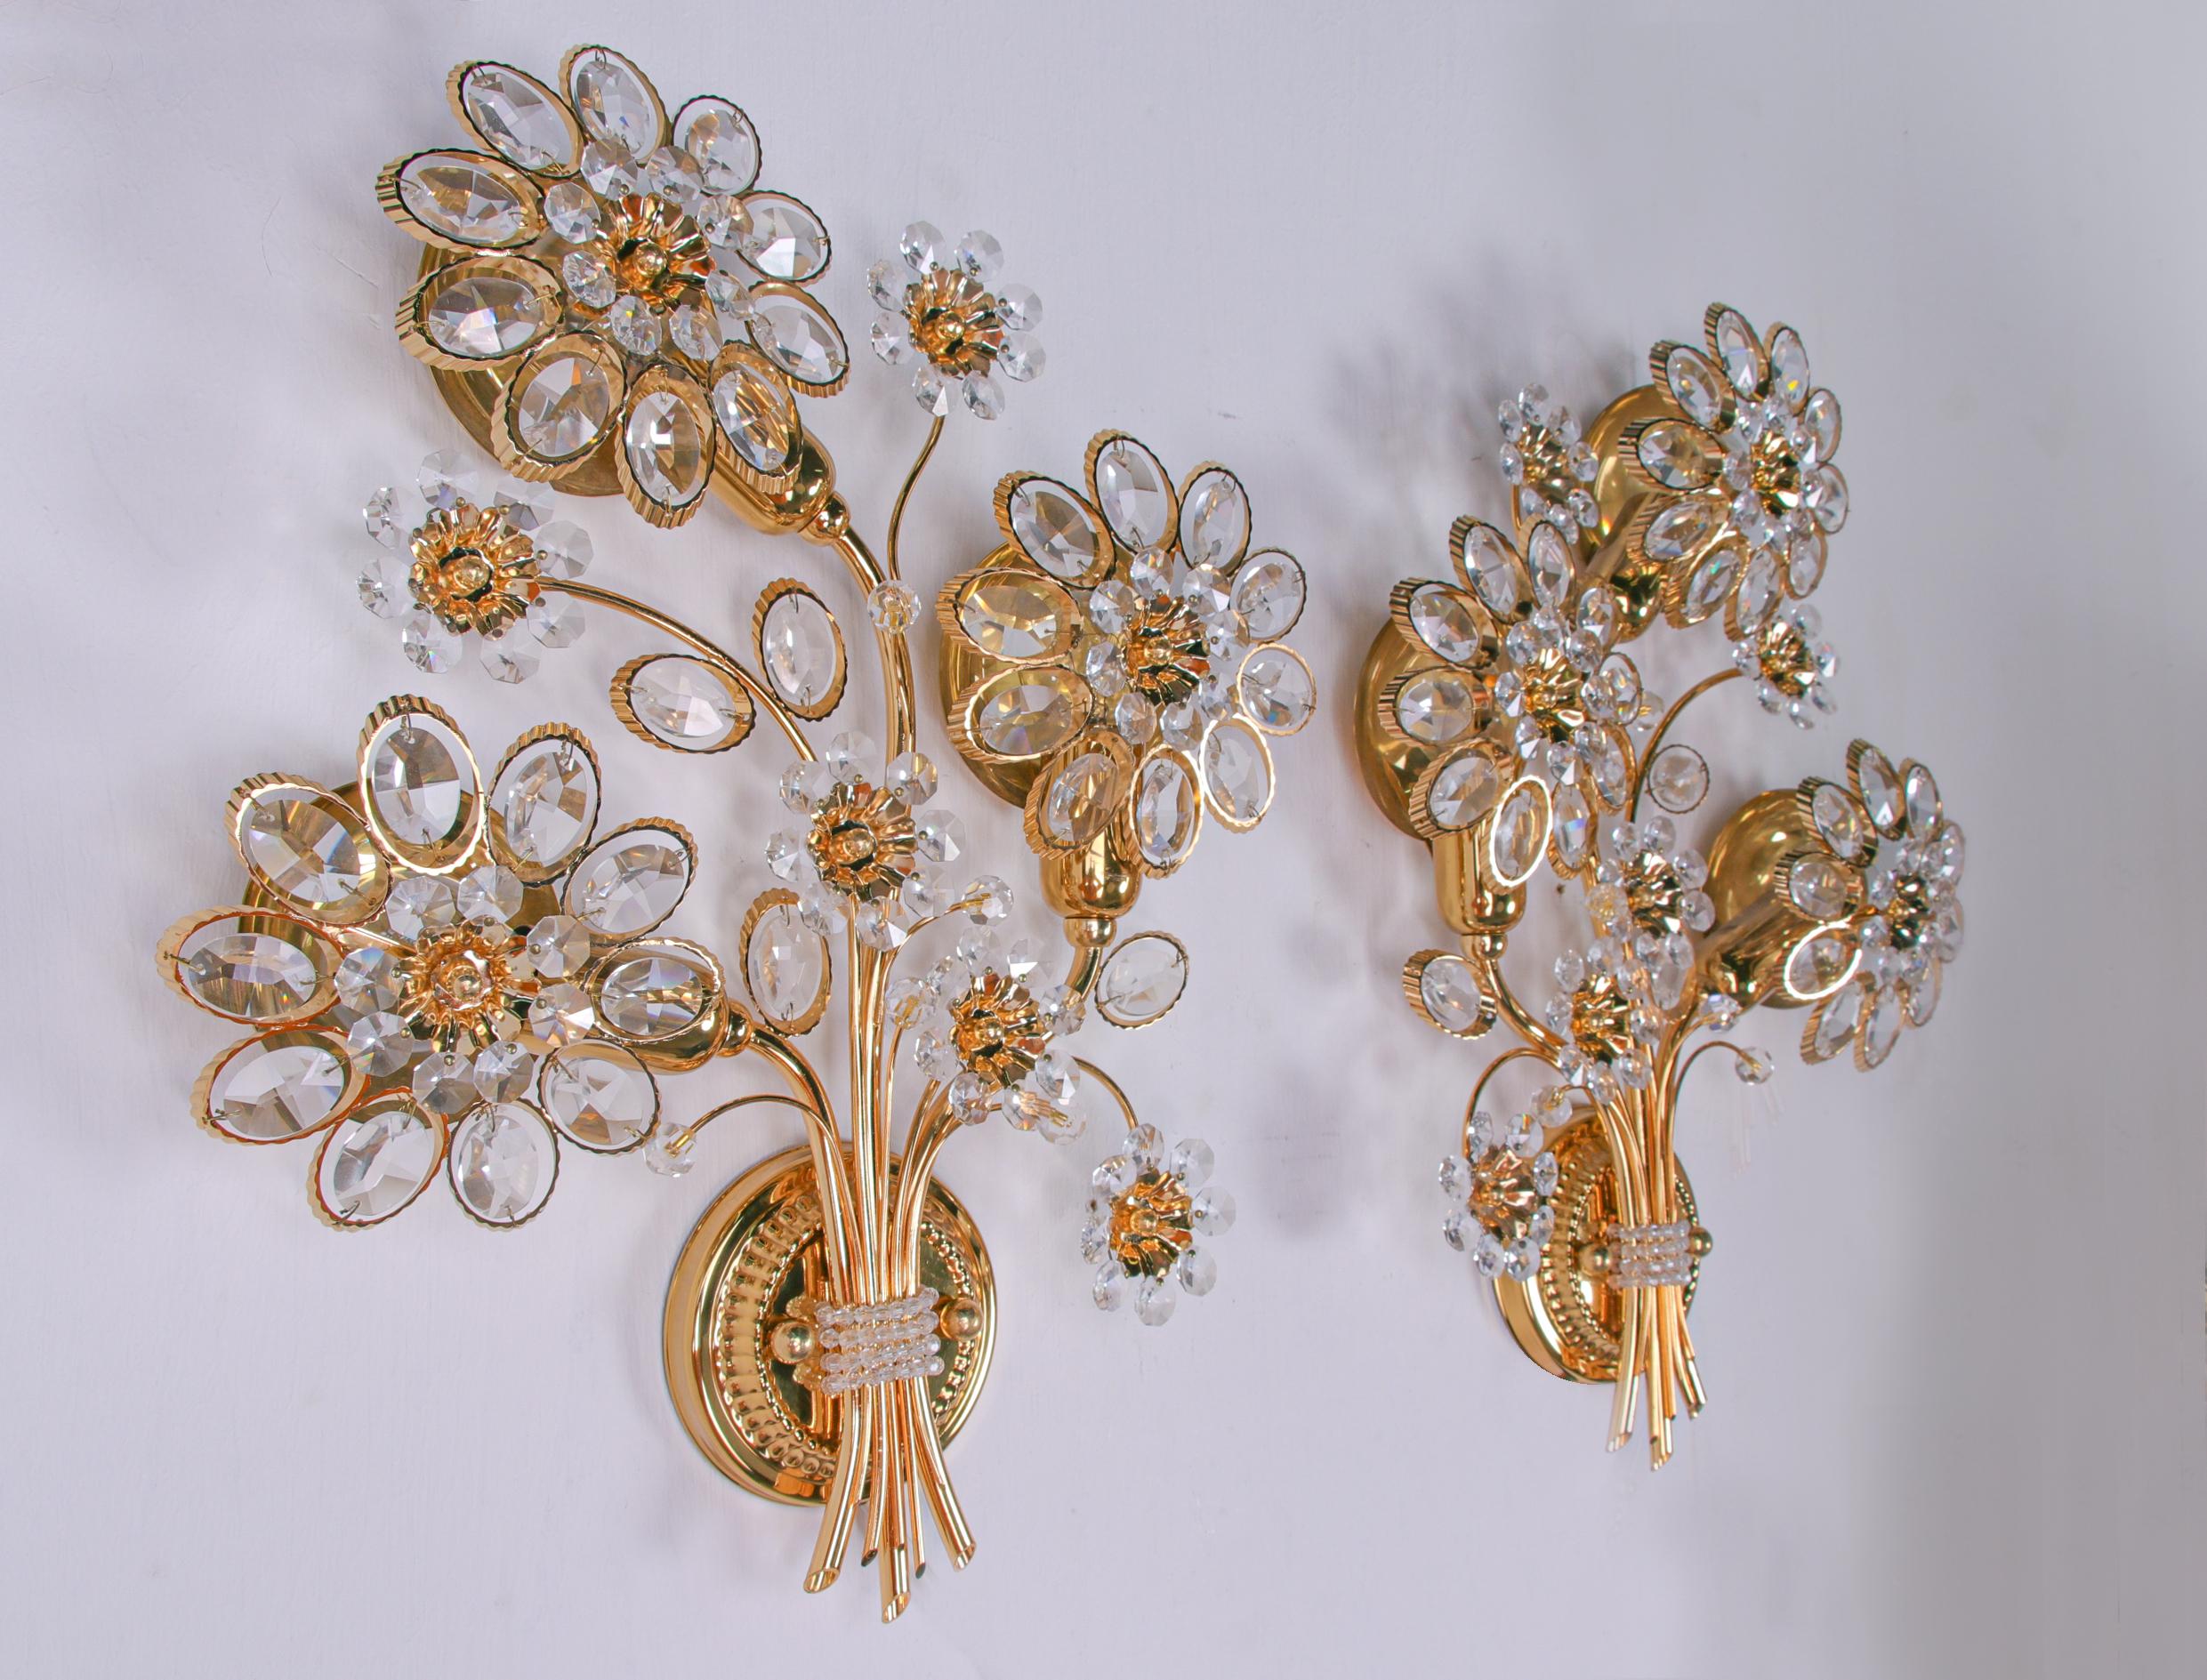 Elegant wall sconces with a gold-plated brass frame and Swarovski crystals. These lamps have an incomparable unique character. A touch of luxury fills the room. 

Manufacturer: Palwa, Palme & Walter., Germany. 
Measures: diameter 12.2